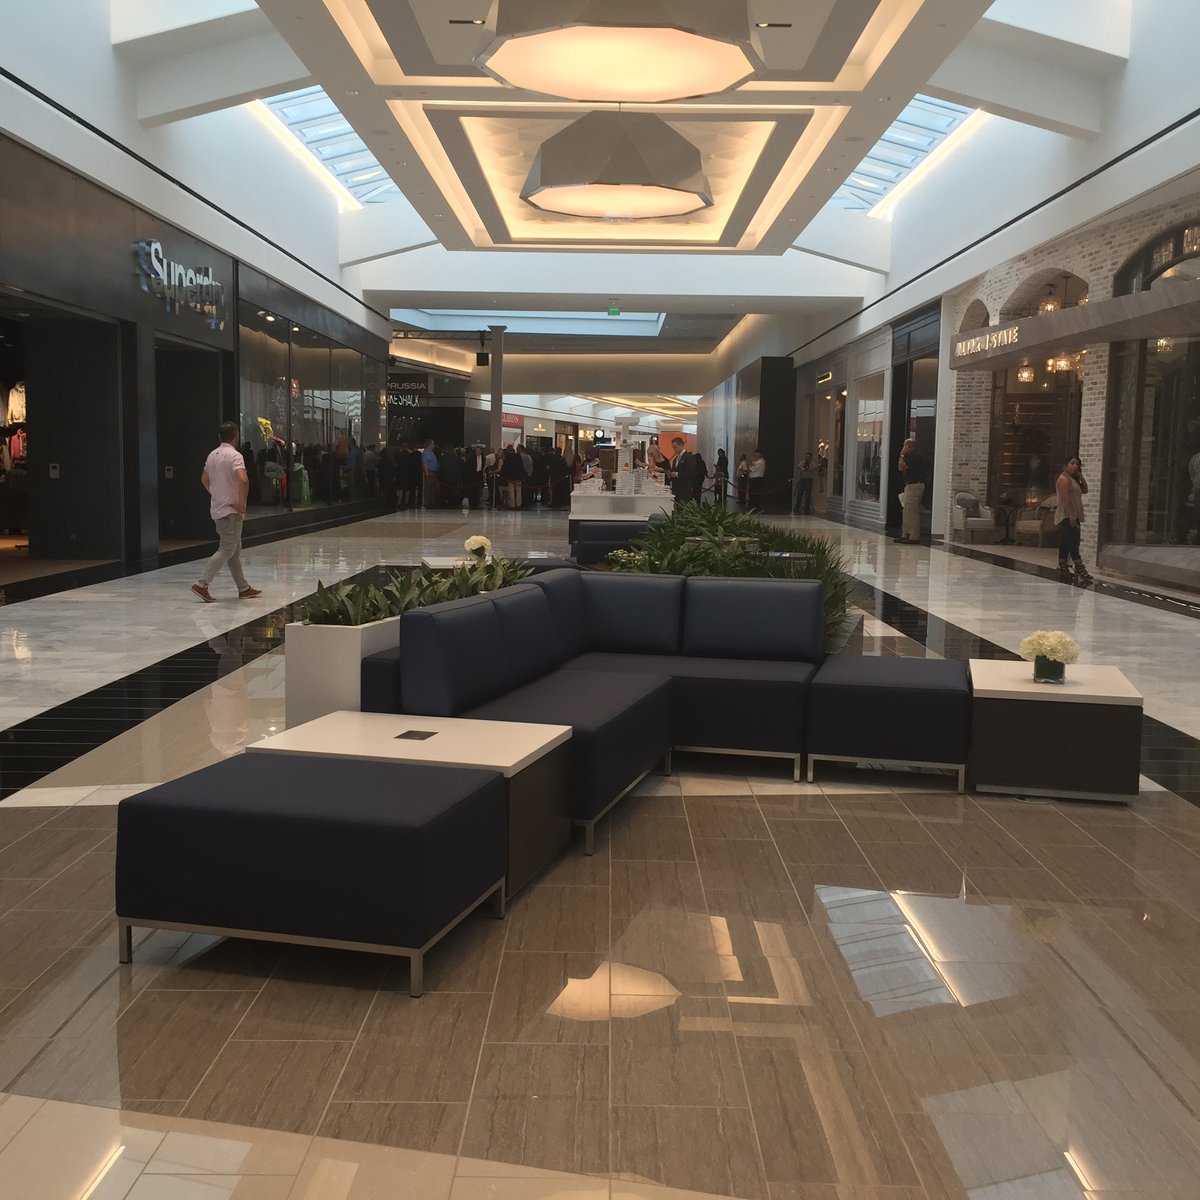 Simon Property Group's King of Prussia Mall expansion to be